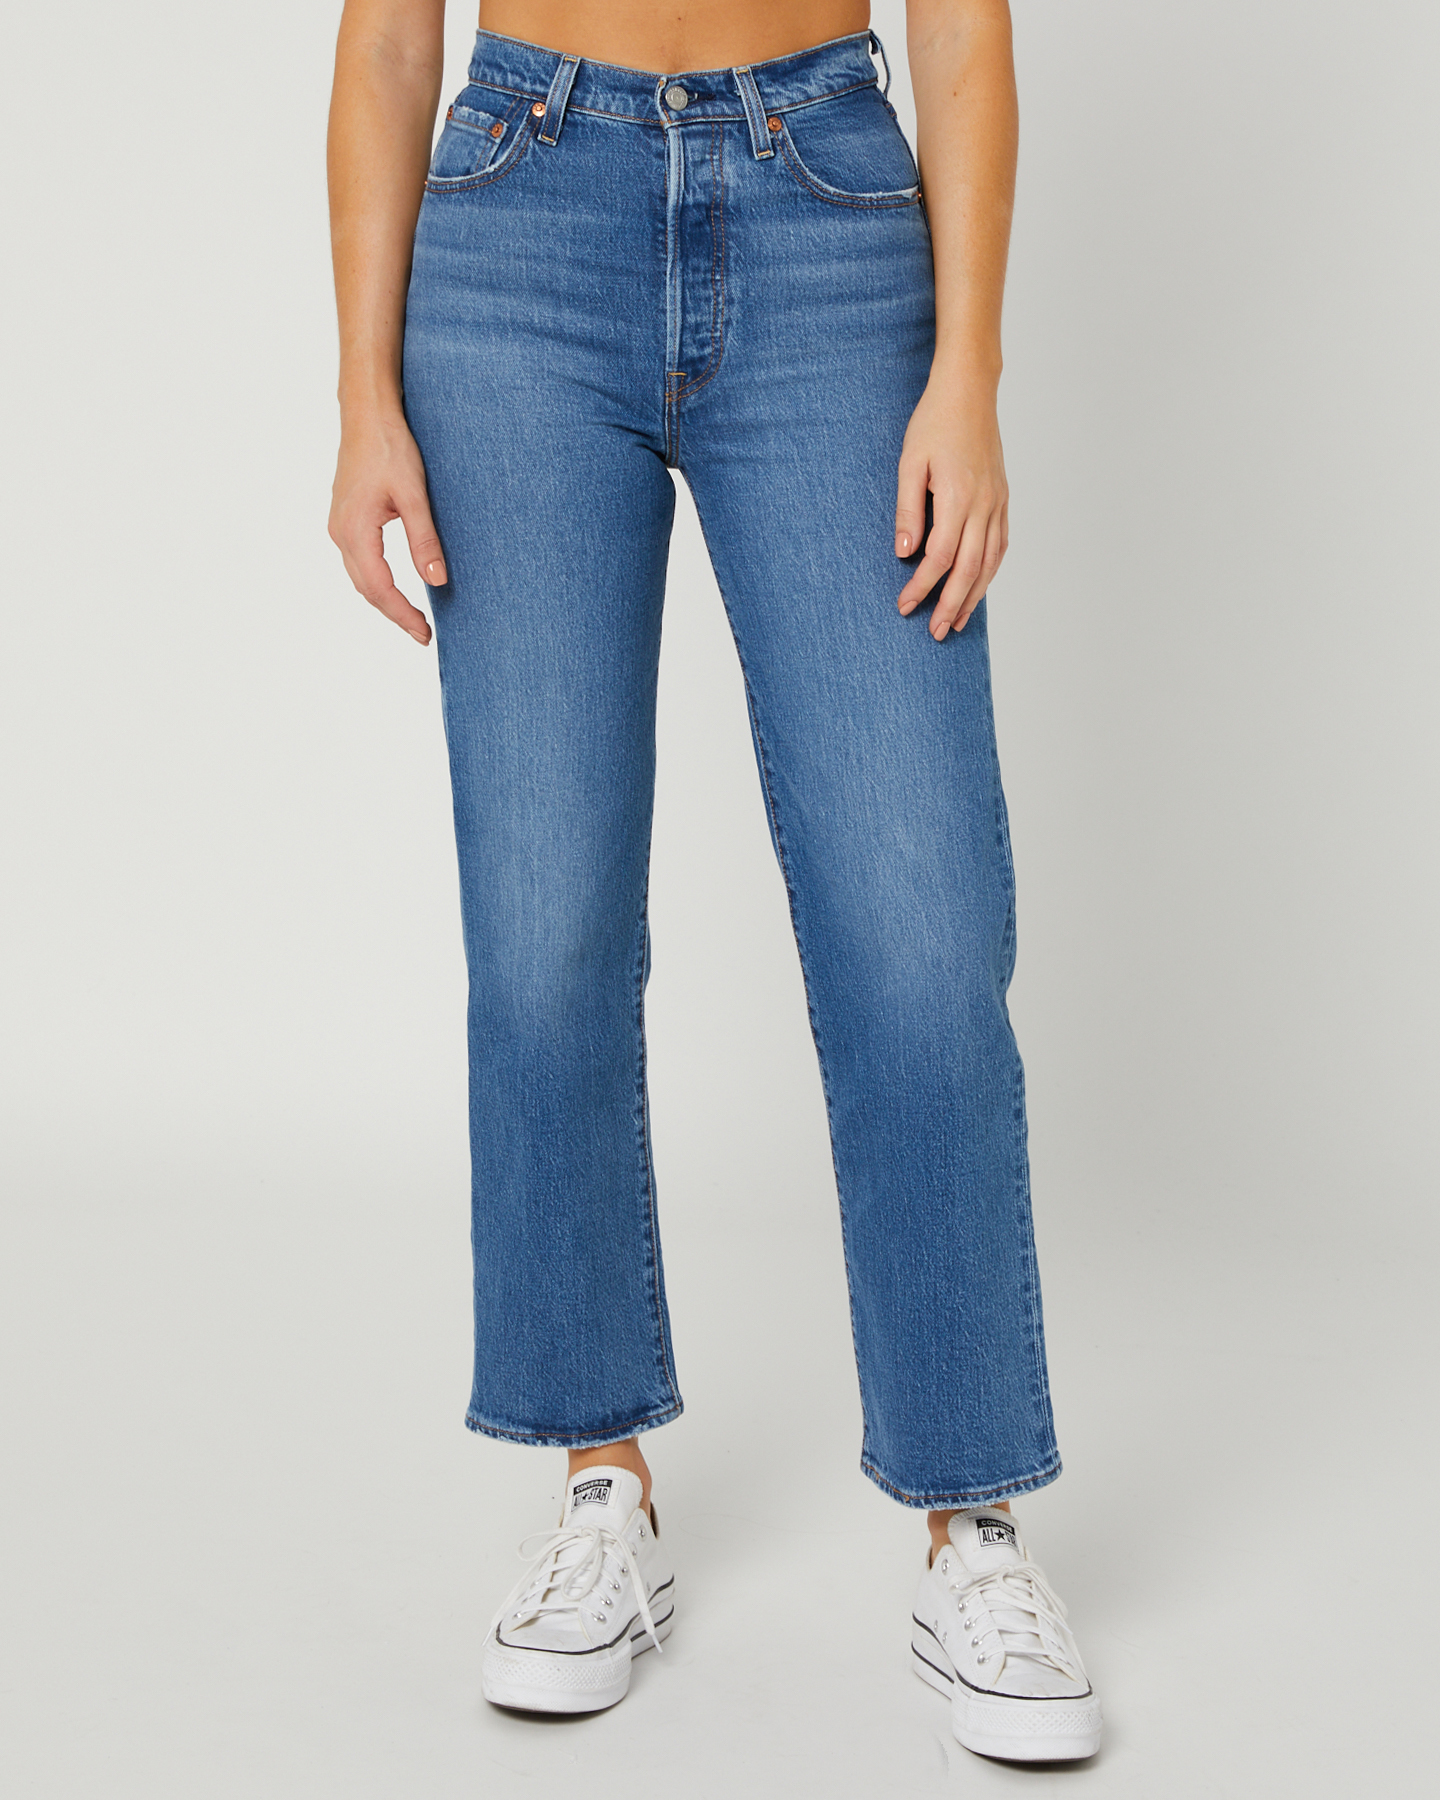 Top 35+ imagen levi’s – ribcage straight ankle jeans in jazz jive together